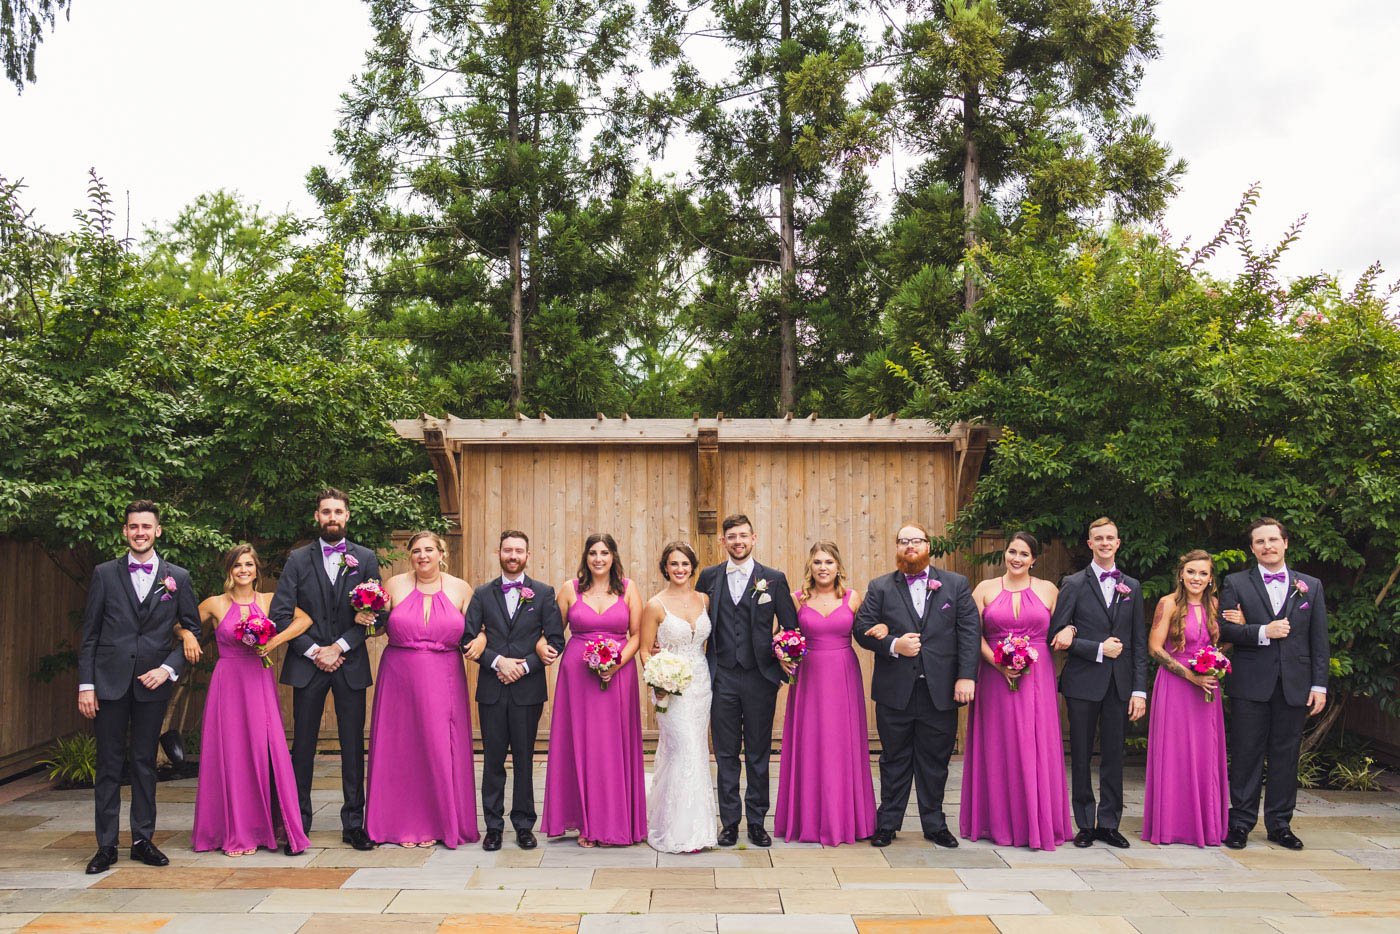 wedding party in front of wooden wall and trees